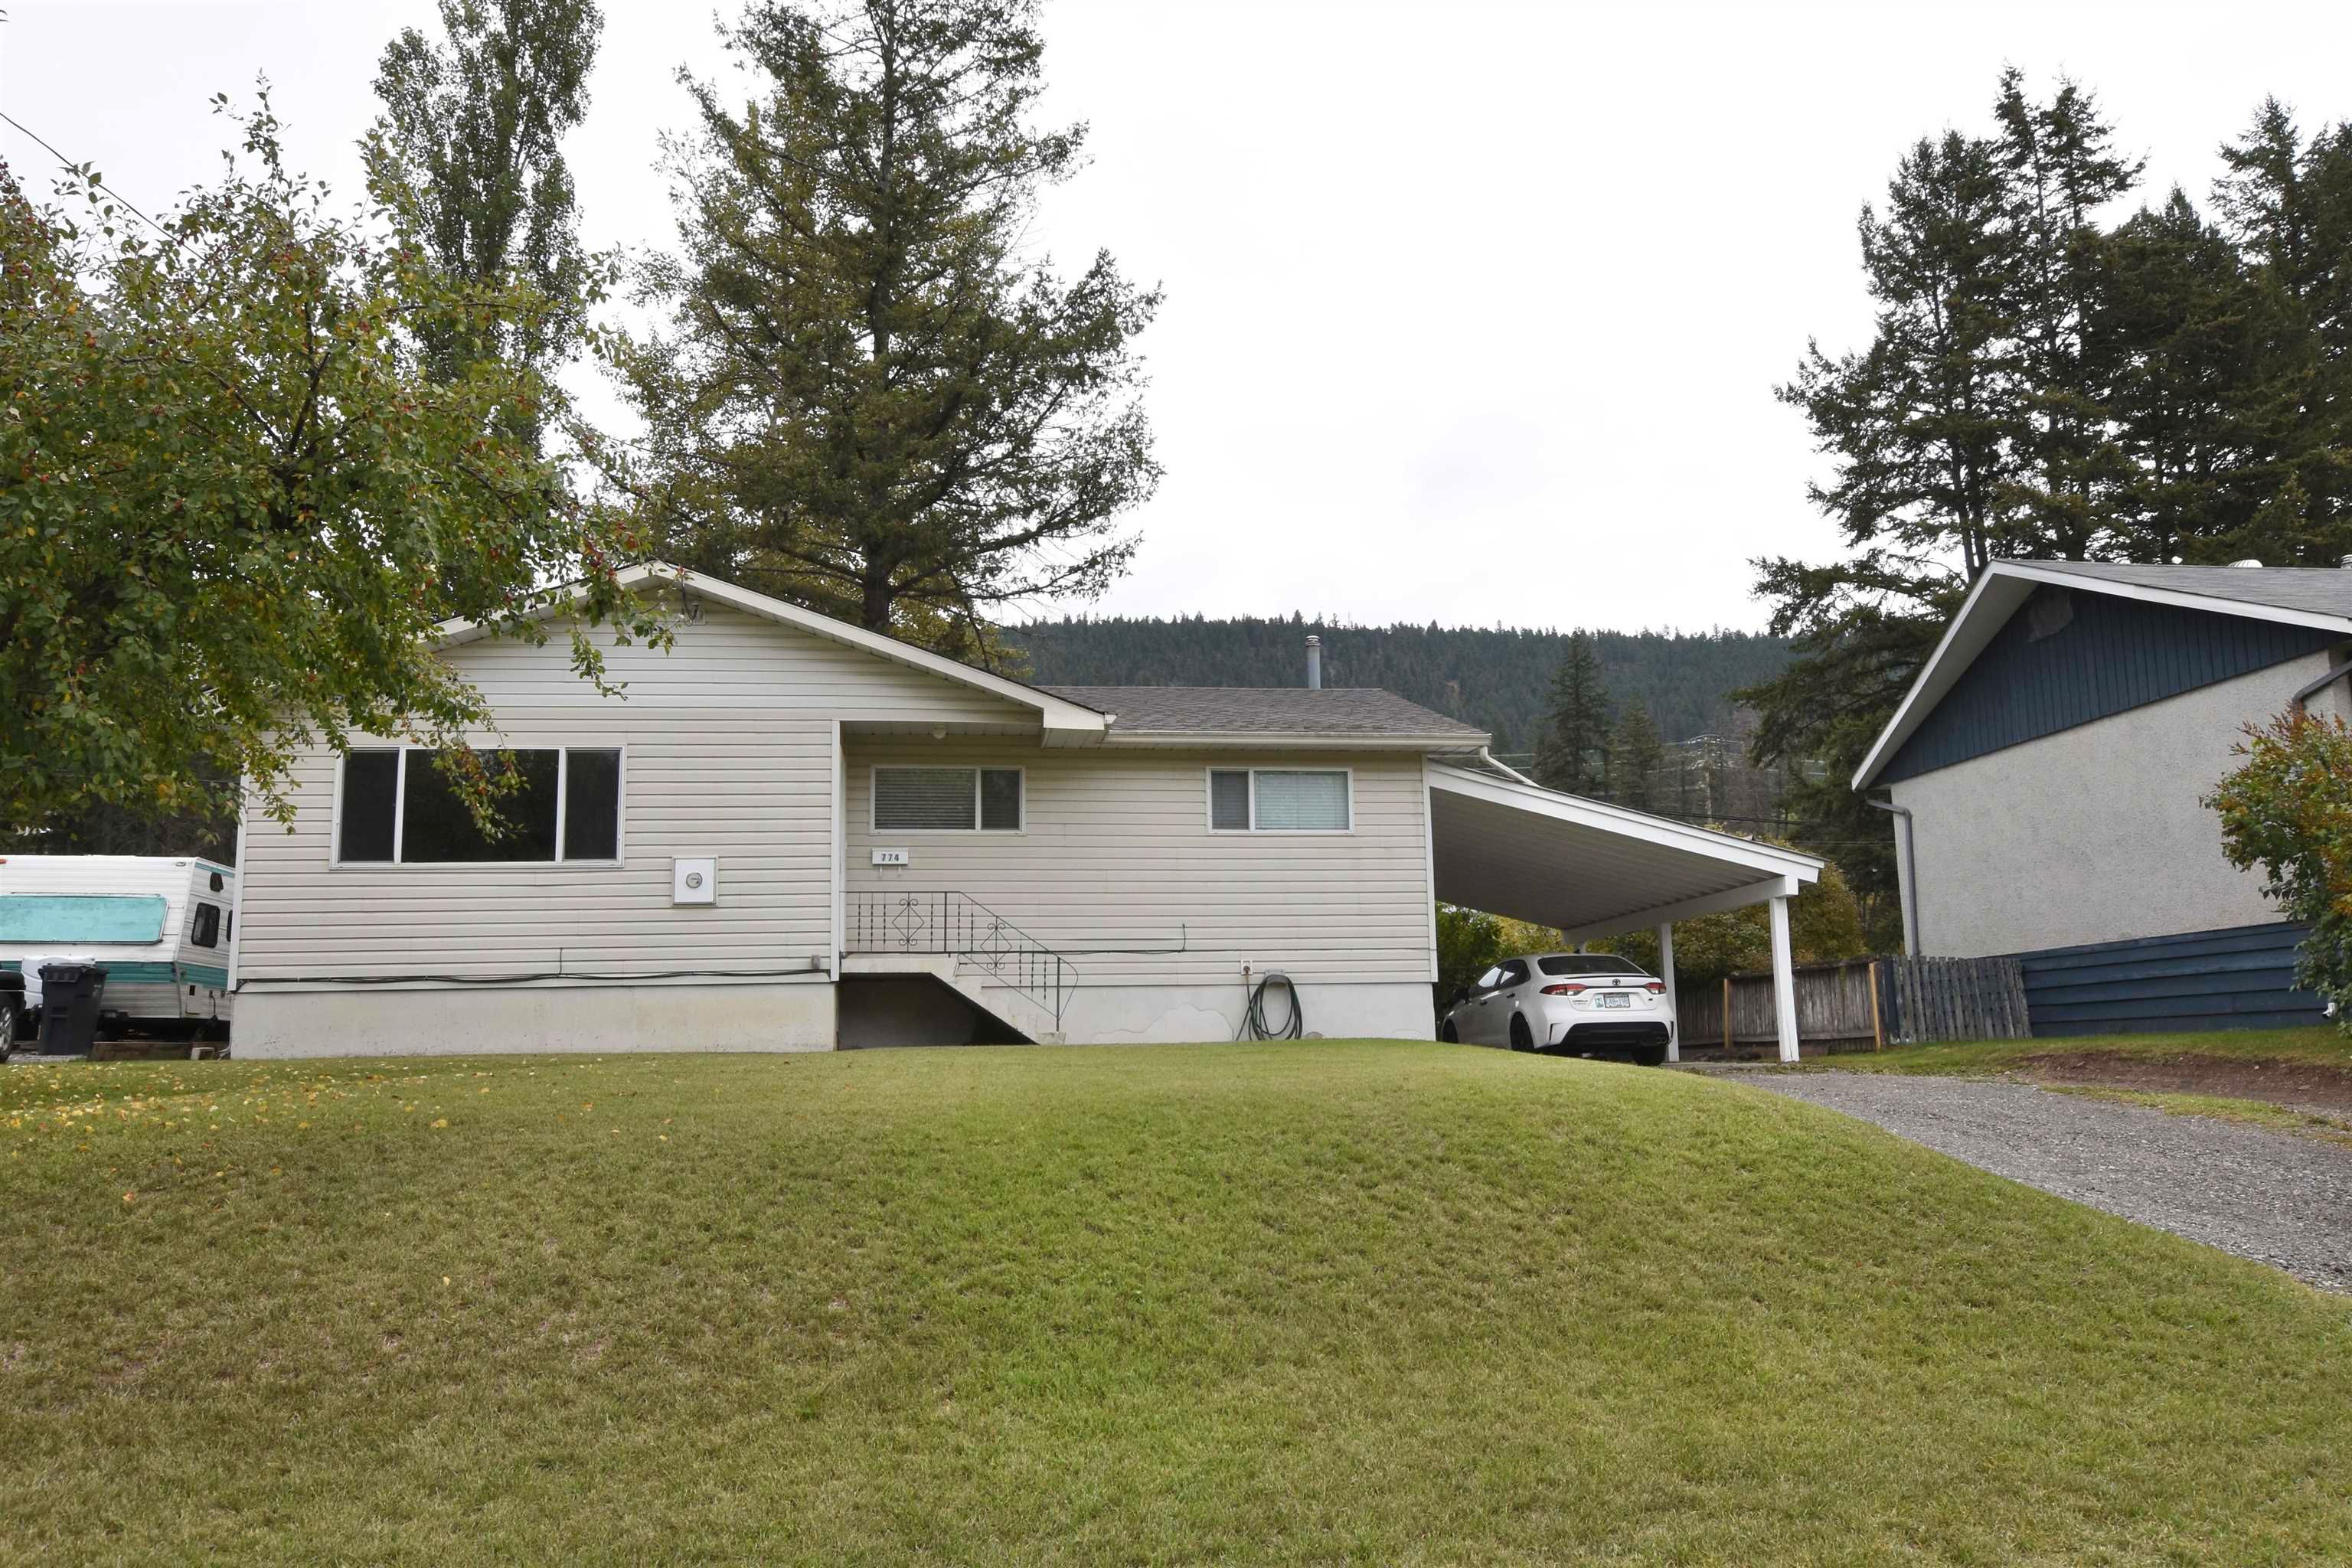 I have sold a property at 774 10TH AVE N in Williams Lake
